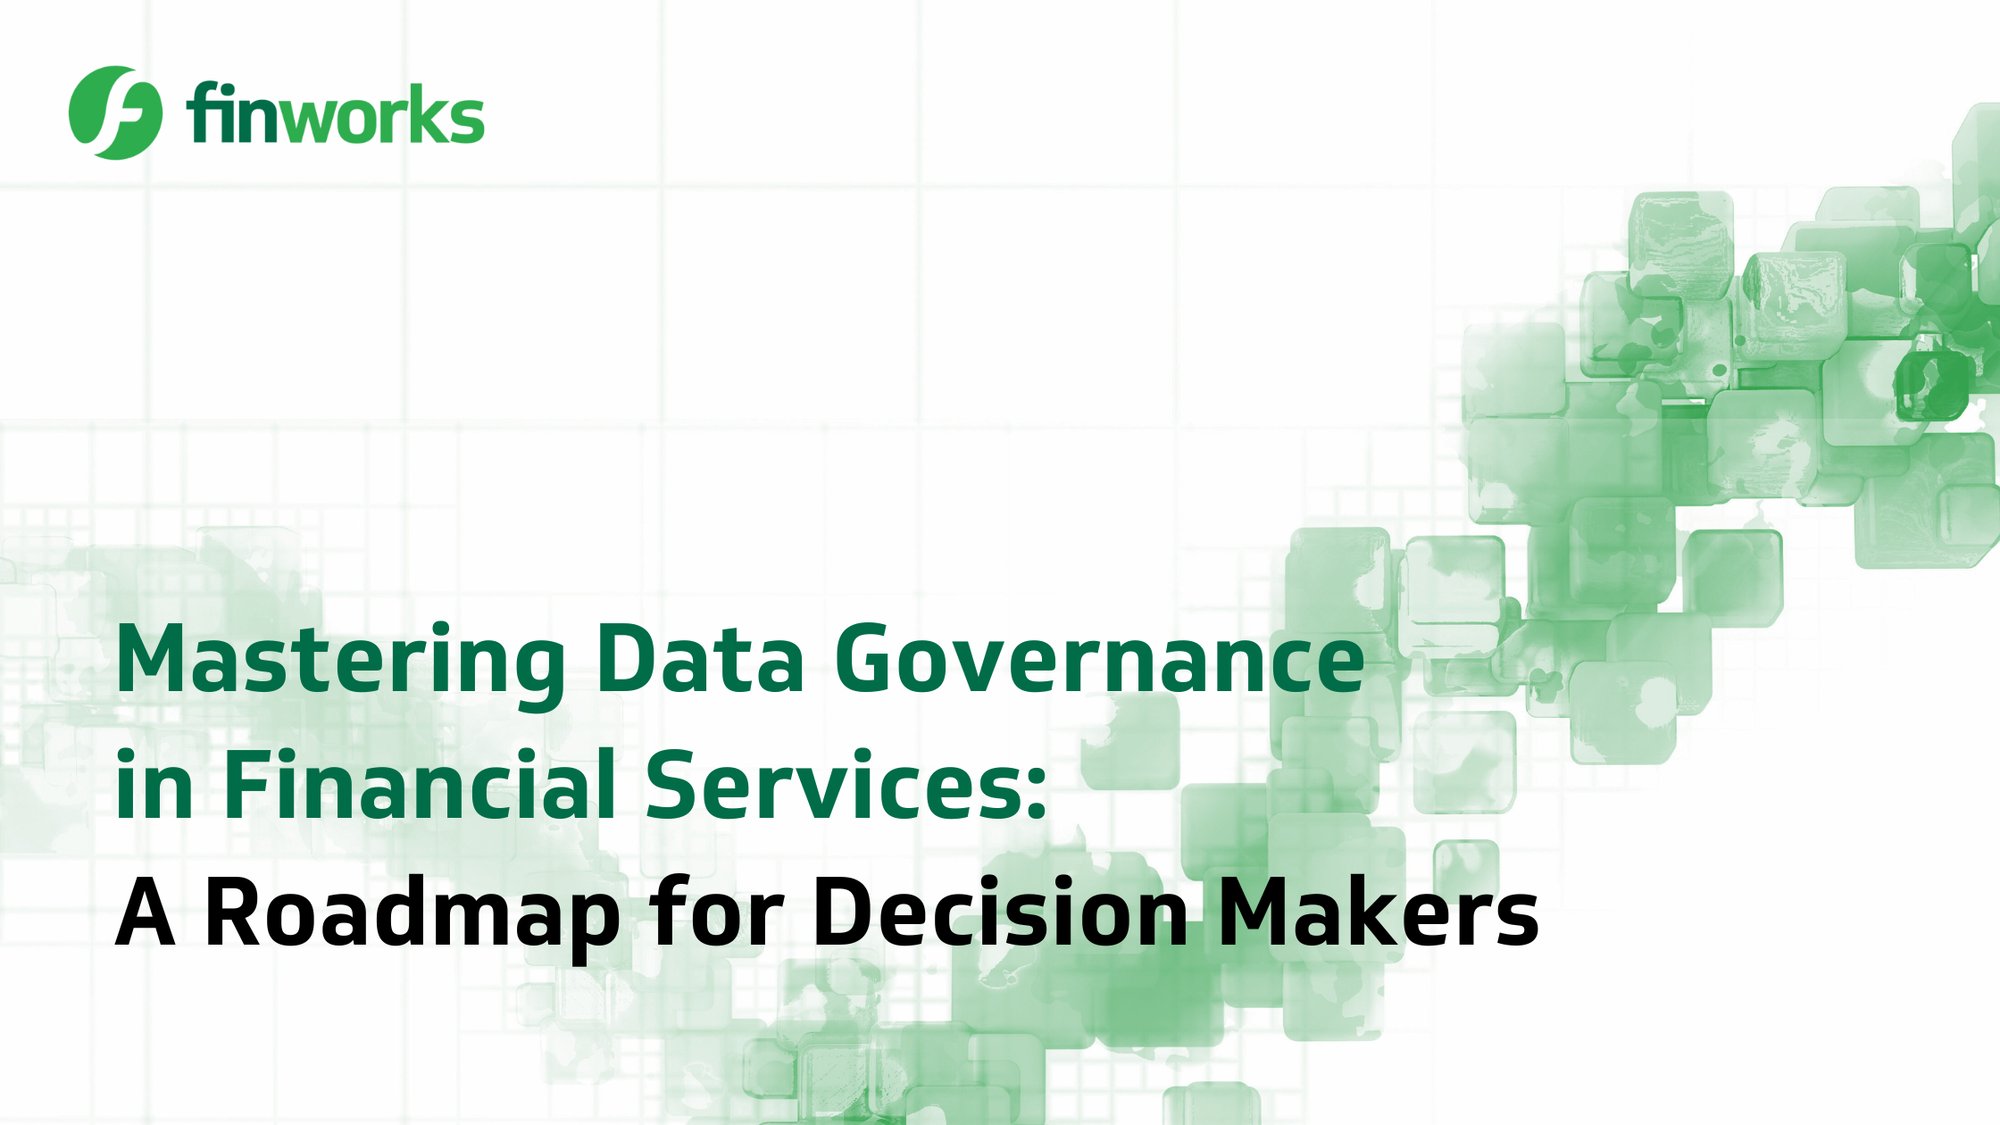 20231020 - Mastering Data Governance in Financial Services Expert Insights - Finworks